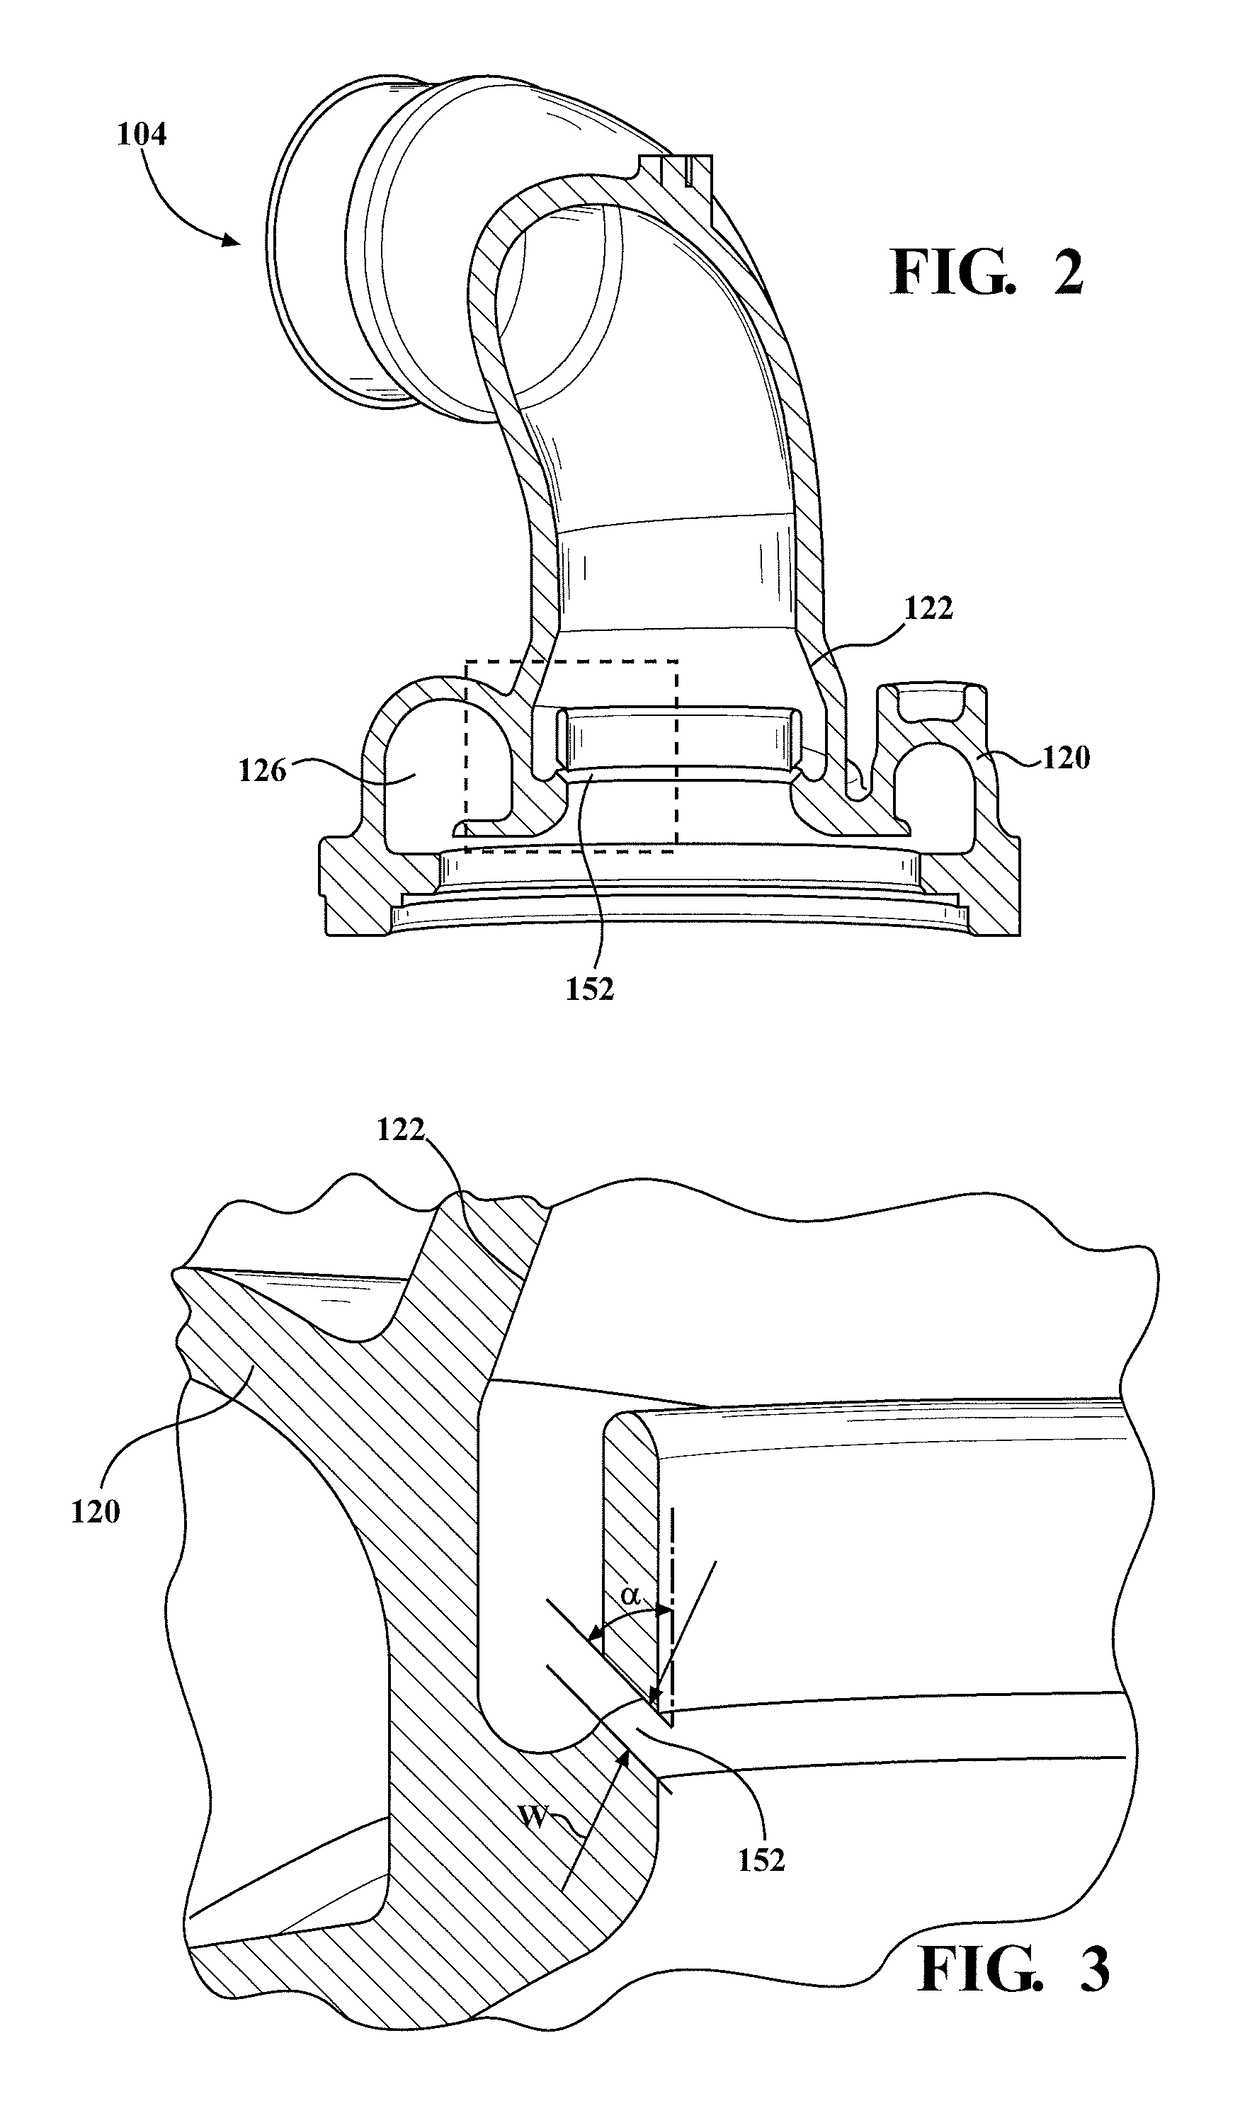 Turbocharger combining axial flow turbine with a compressor stage utilizing active casing treatment